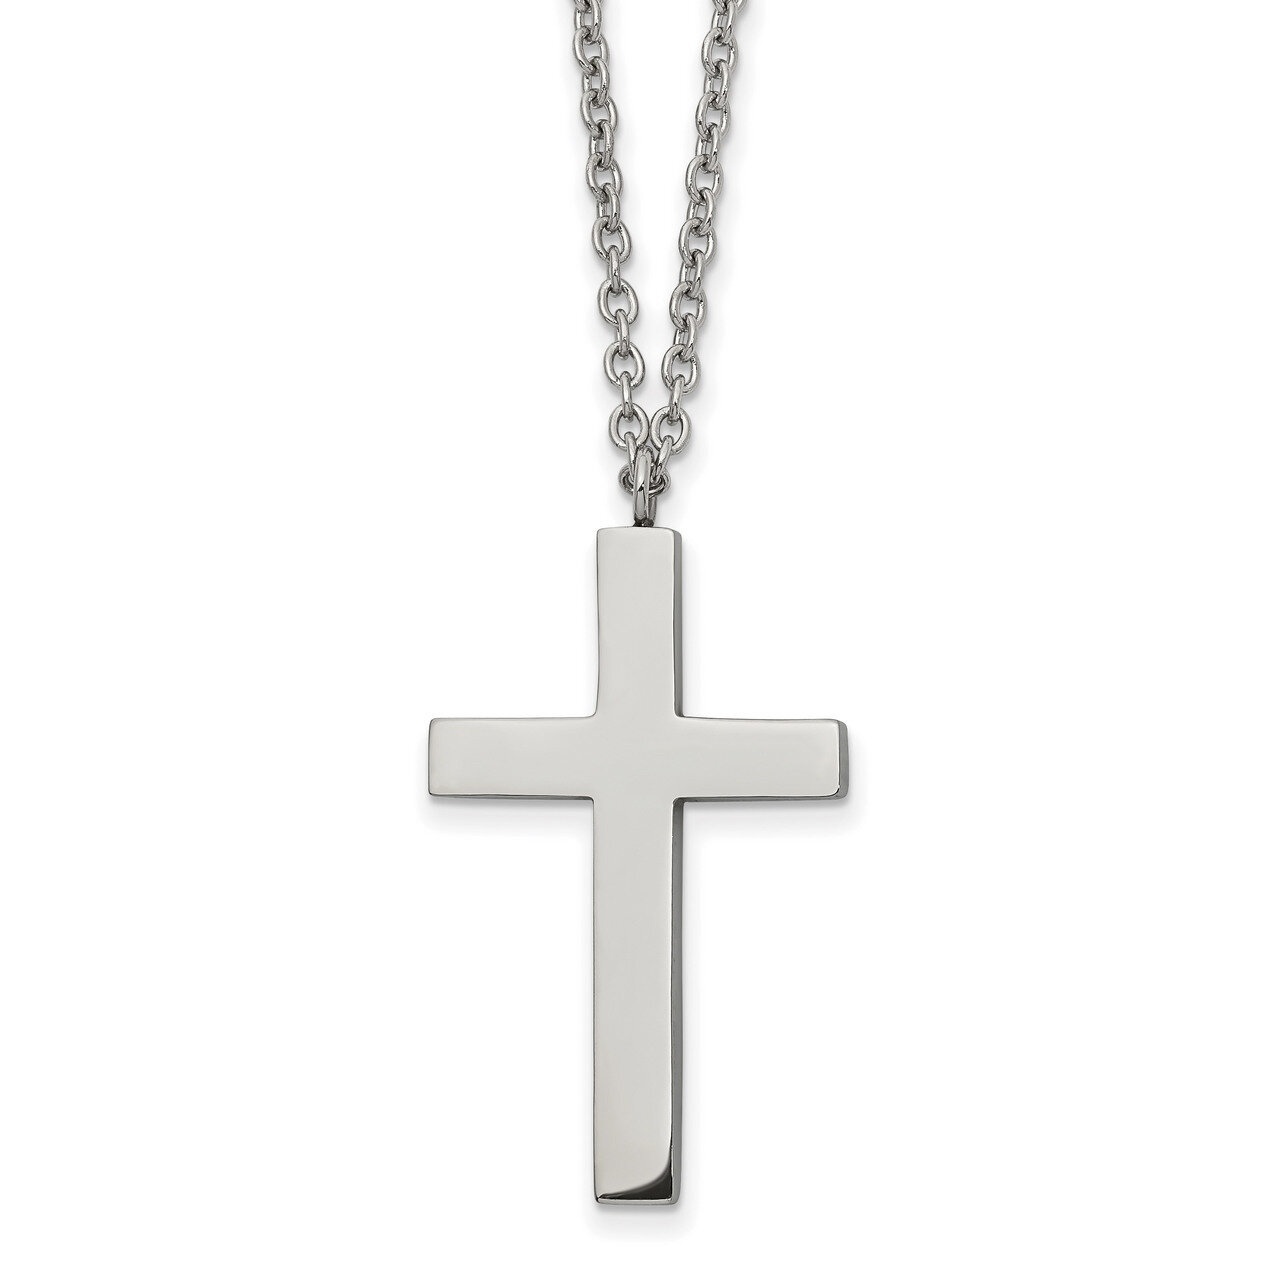 32mm Cross 18 inch Necklace Stainless Steel Polished SRN2504-18